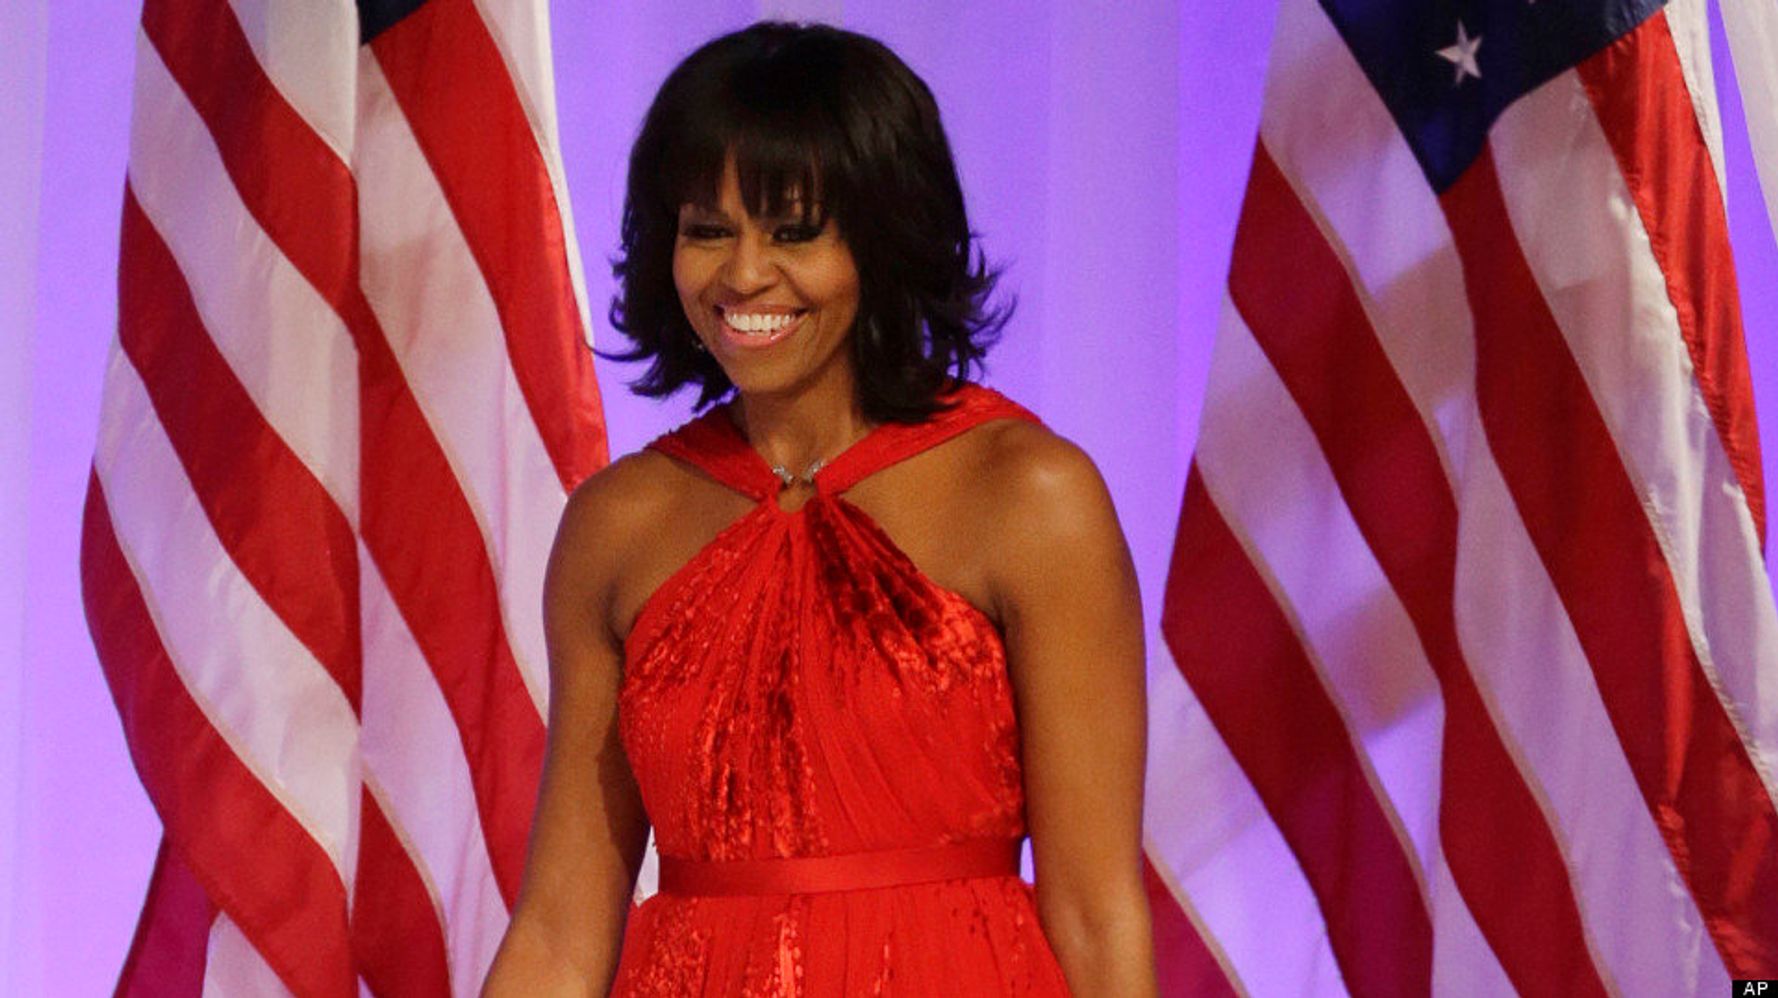 What Michelle Obamas Inaugural Fashion Means Huffpost Videos 1845